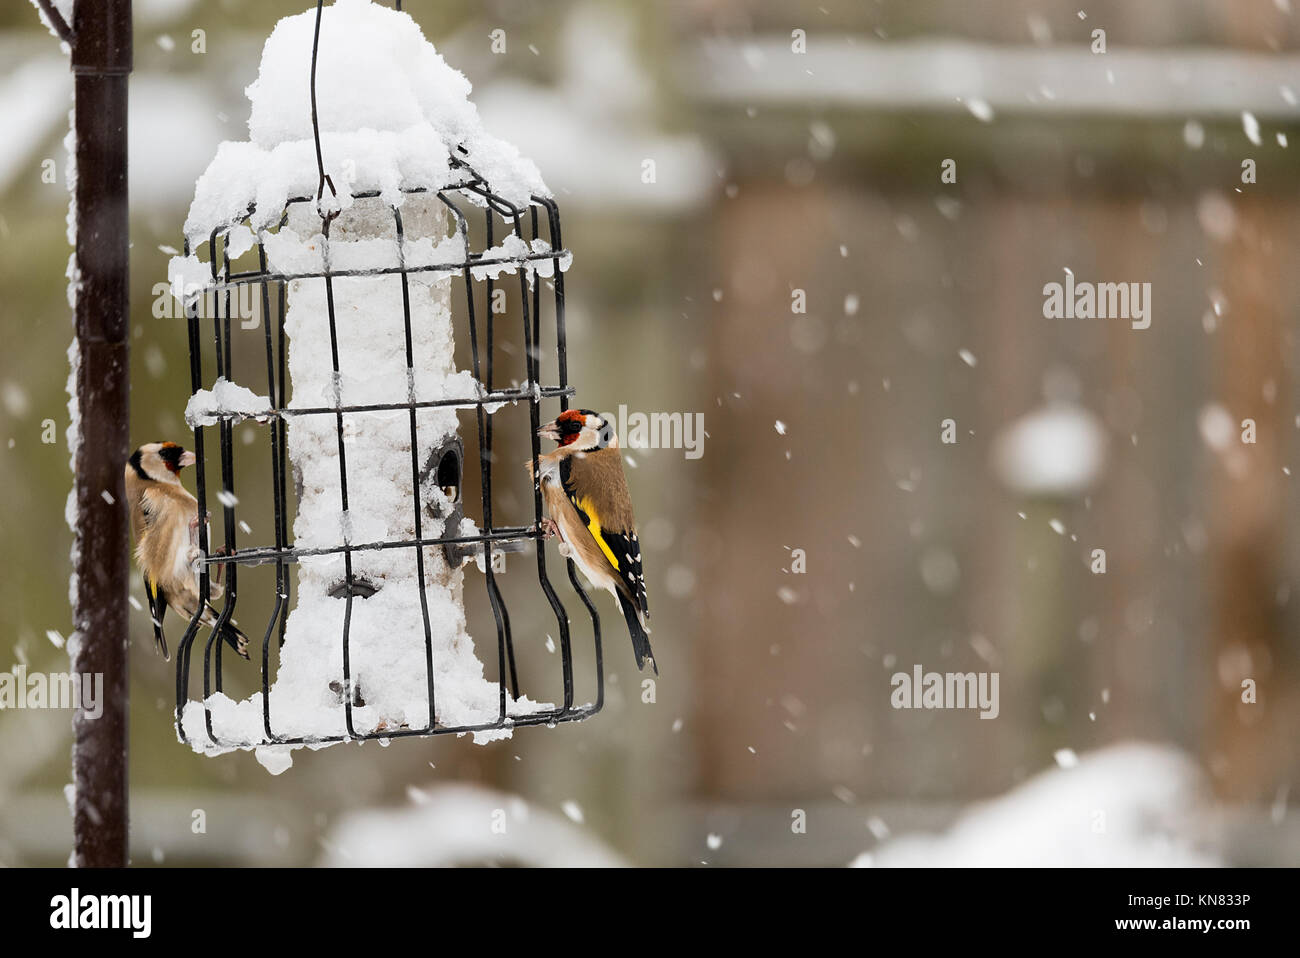 Warwickshire, UK. 10th Dec, 2017. Winter Snow Storm Weather, Warwickshire, UK. 10th December 2017. Common British birds feeding on a bird feeder in a house hold garden. Credit: 79Photography/Alamy Live News Stock Photo